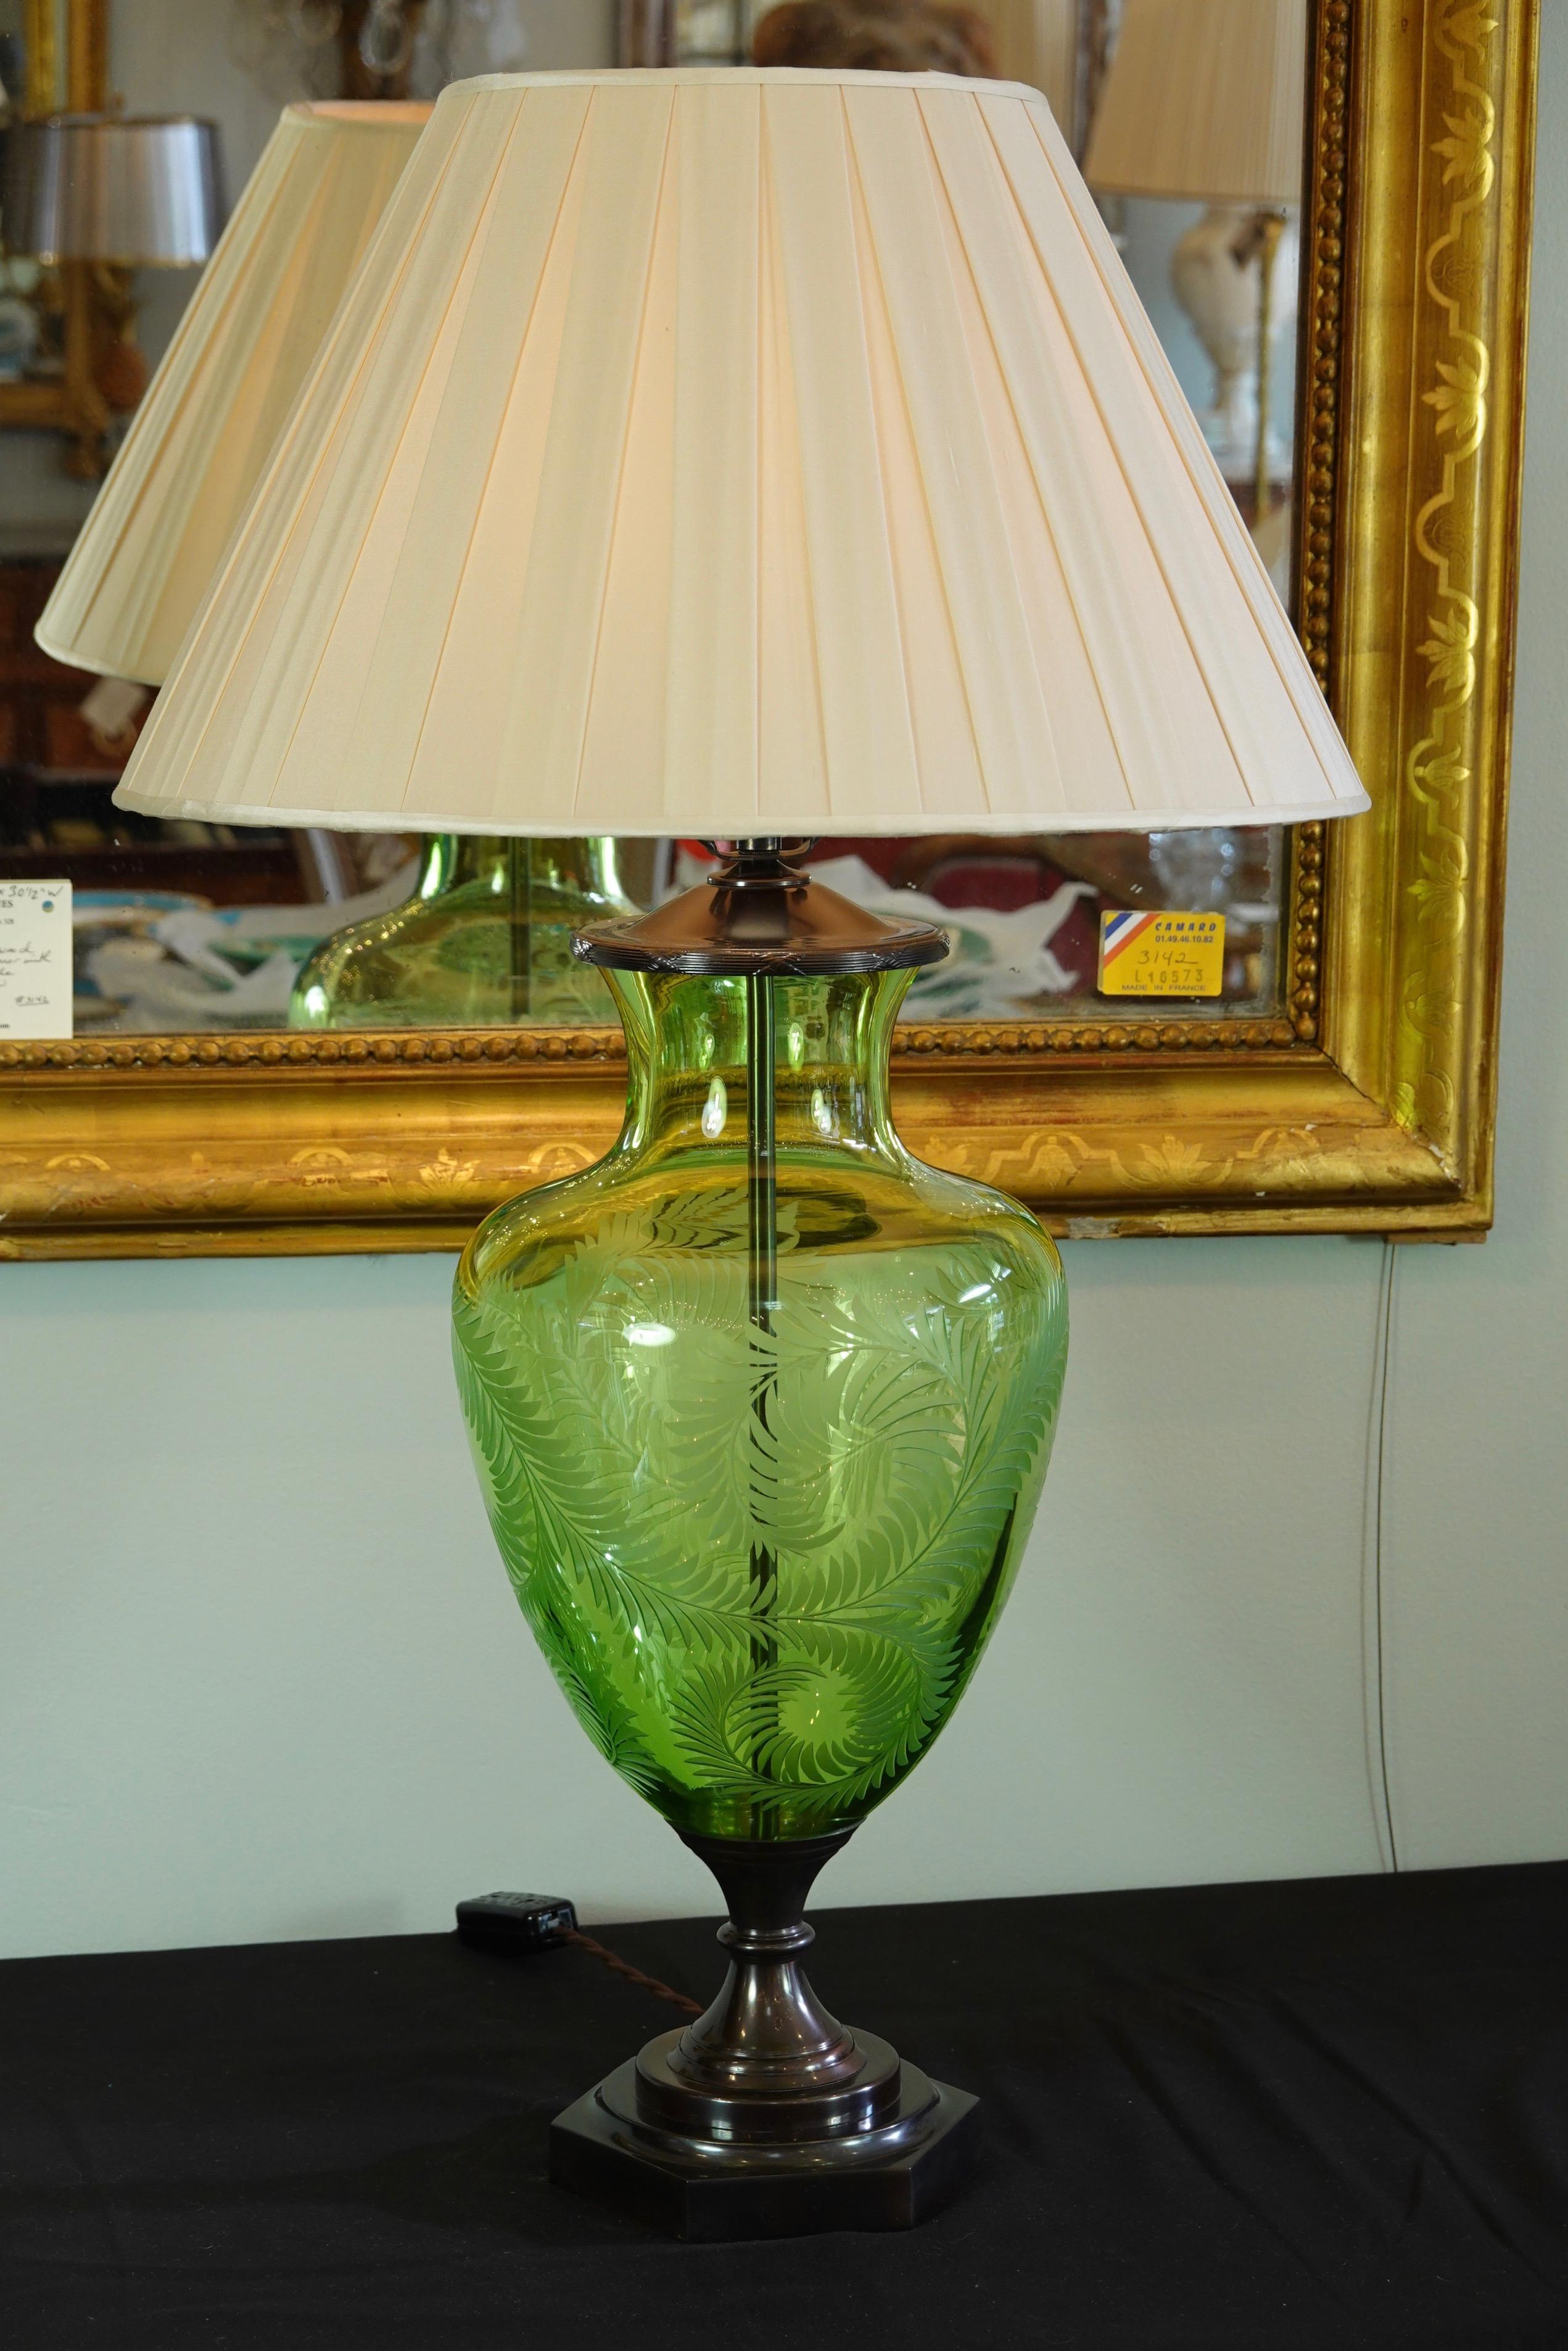 Light green crystal urn-form lamp with etched fern leafs design by Lucy Cope. The lamp was handmade in England and is wired for the US. The lamp features patinated bronze octagonal base and vase cap with reed and ribbon design. Included new pleated